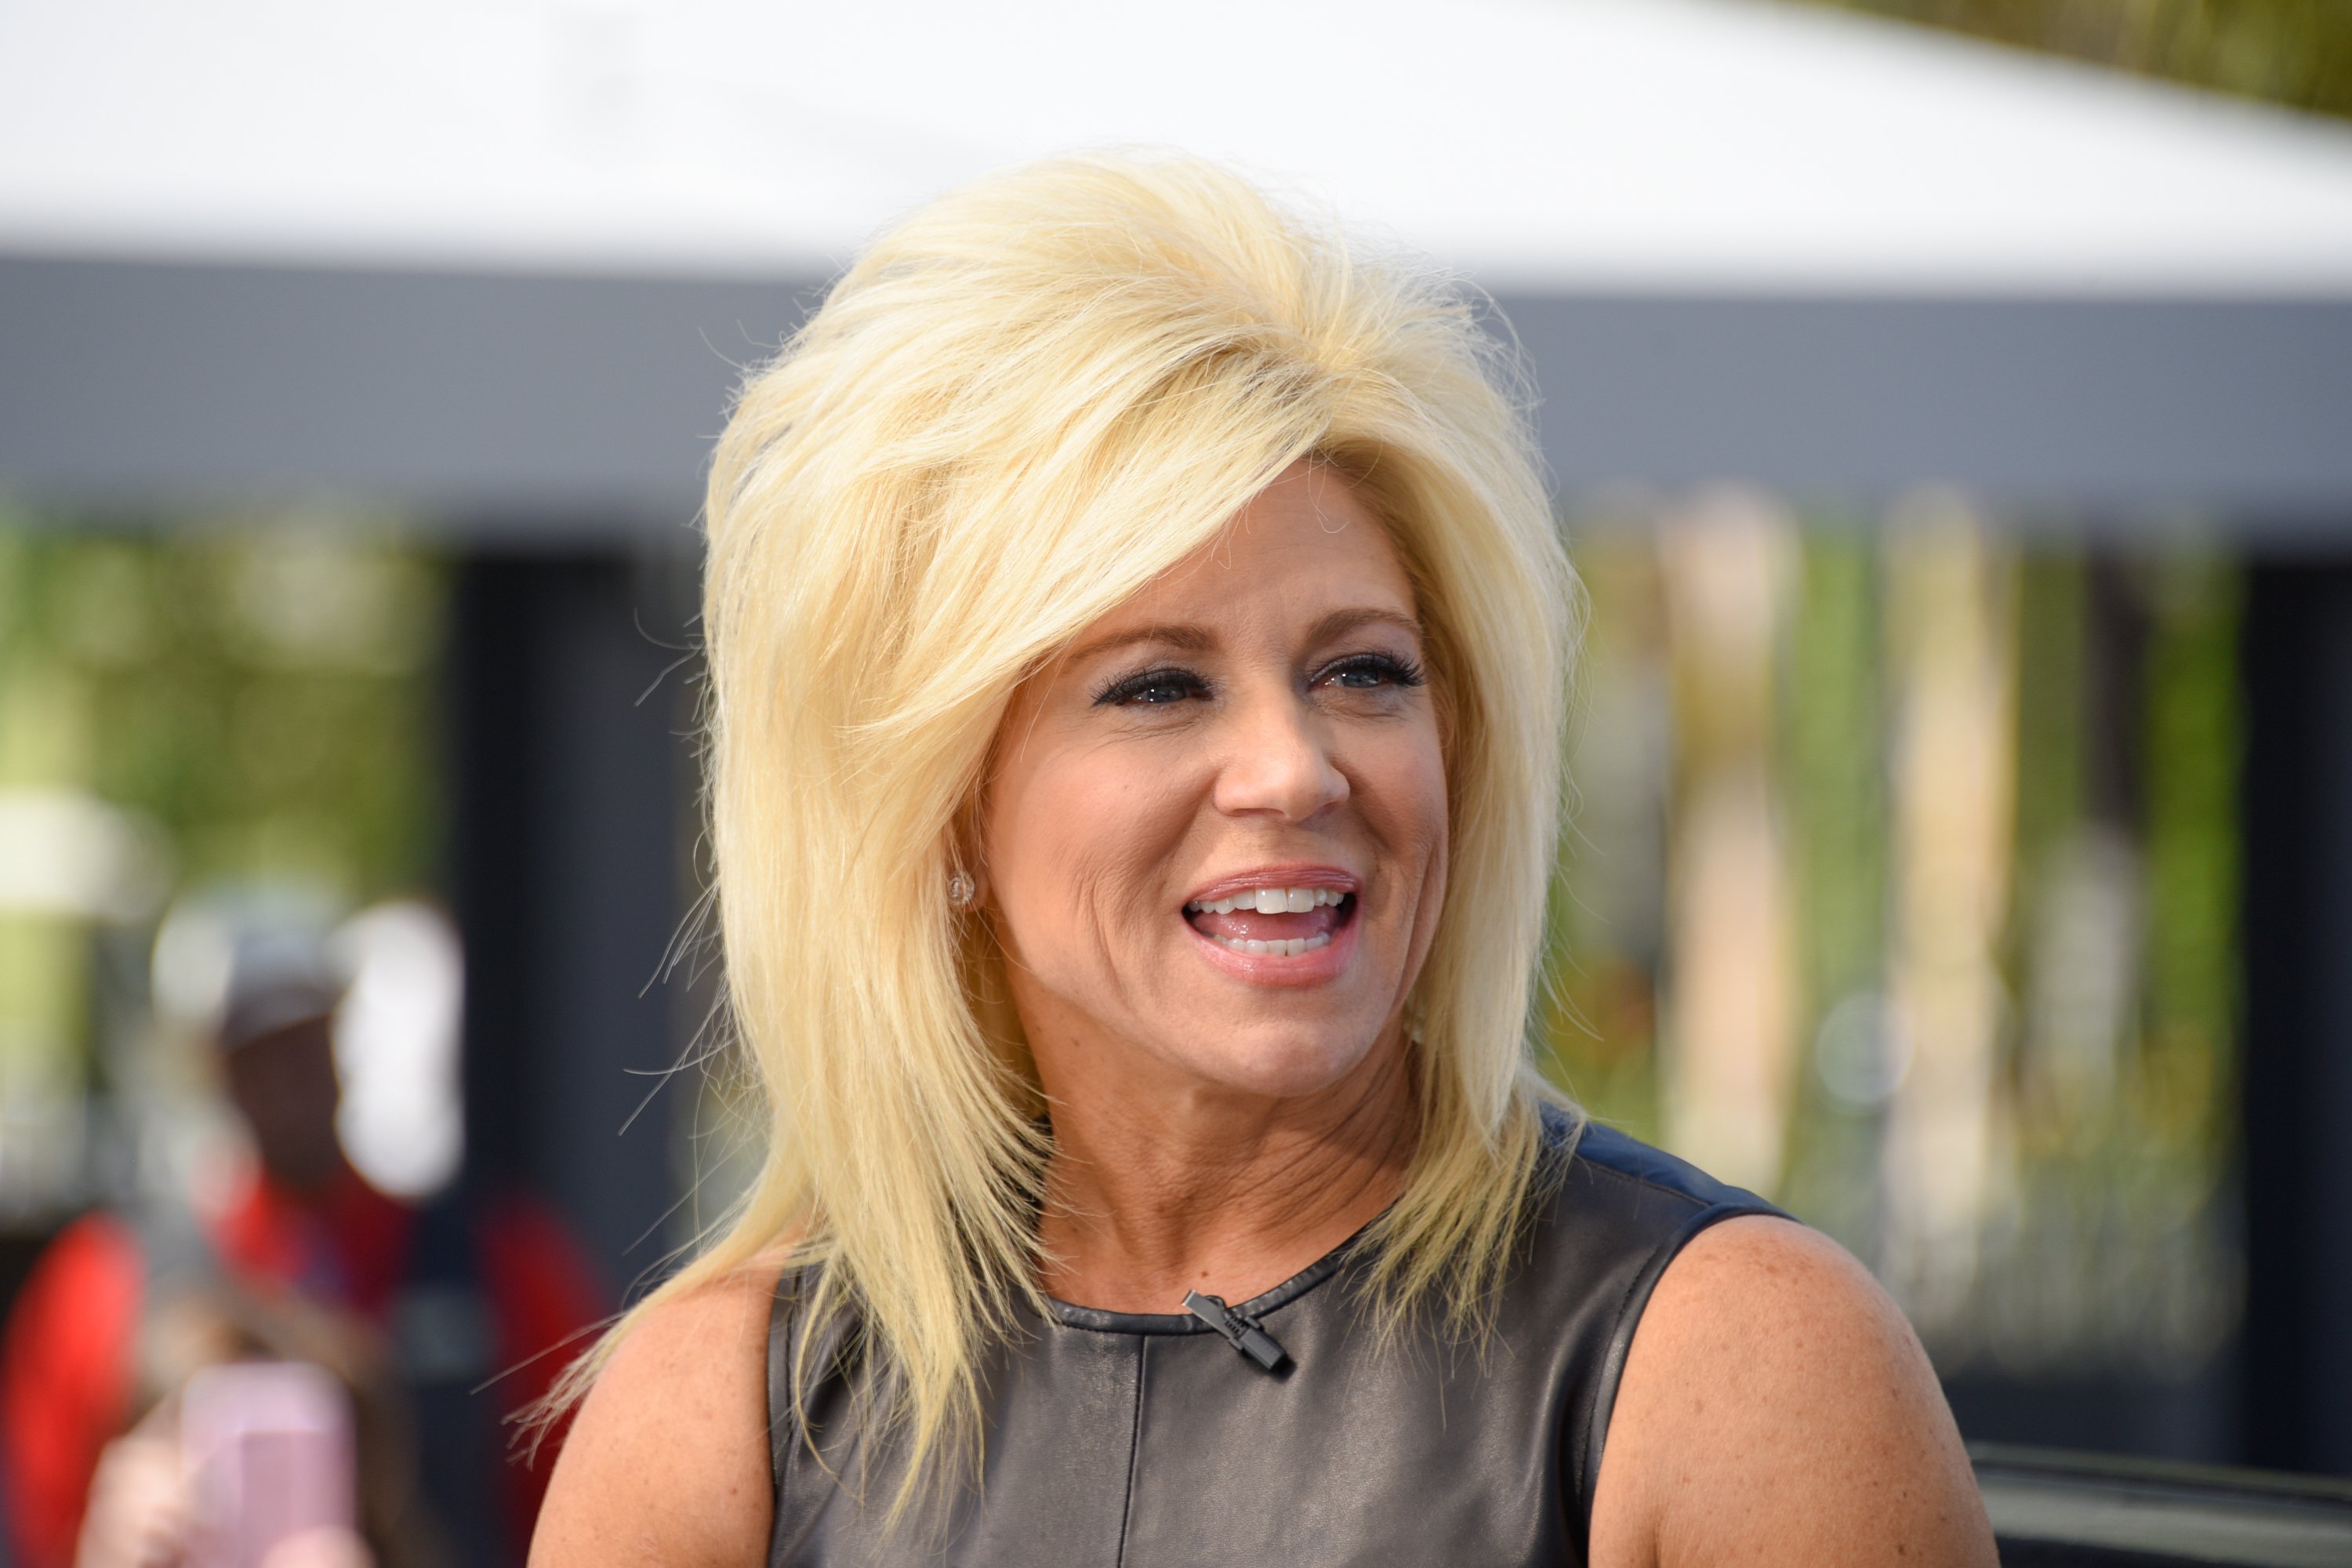 Theresa Caputo visits "Extra" at Universal Studios Hollywood on March 7, 2017 in Universal City, California | Photo: Getty Images